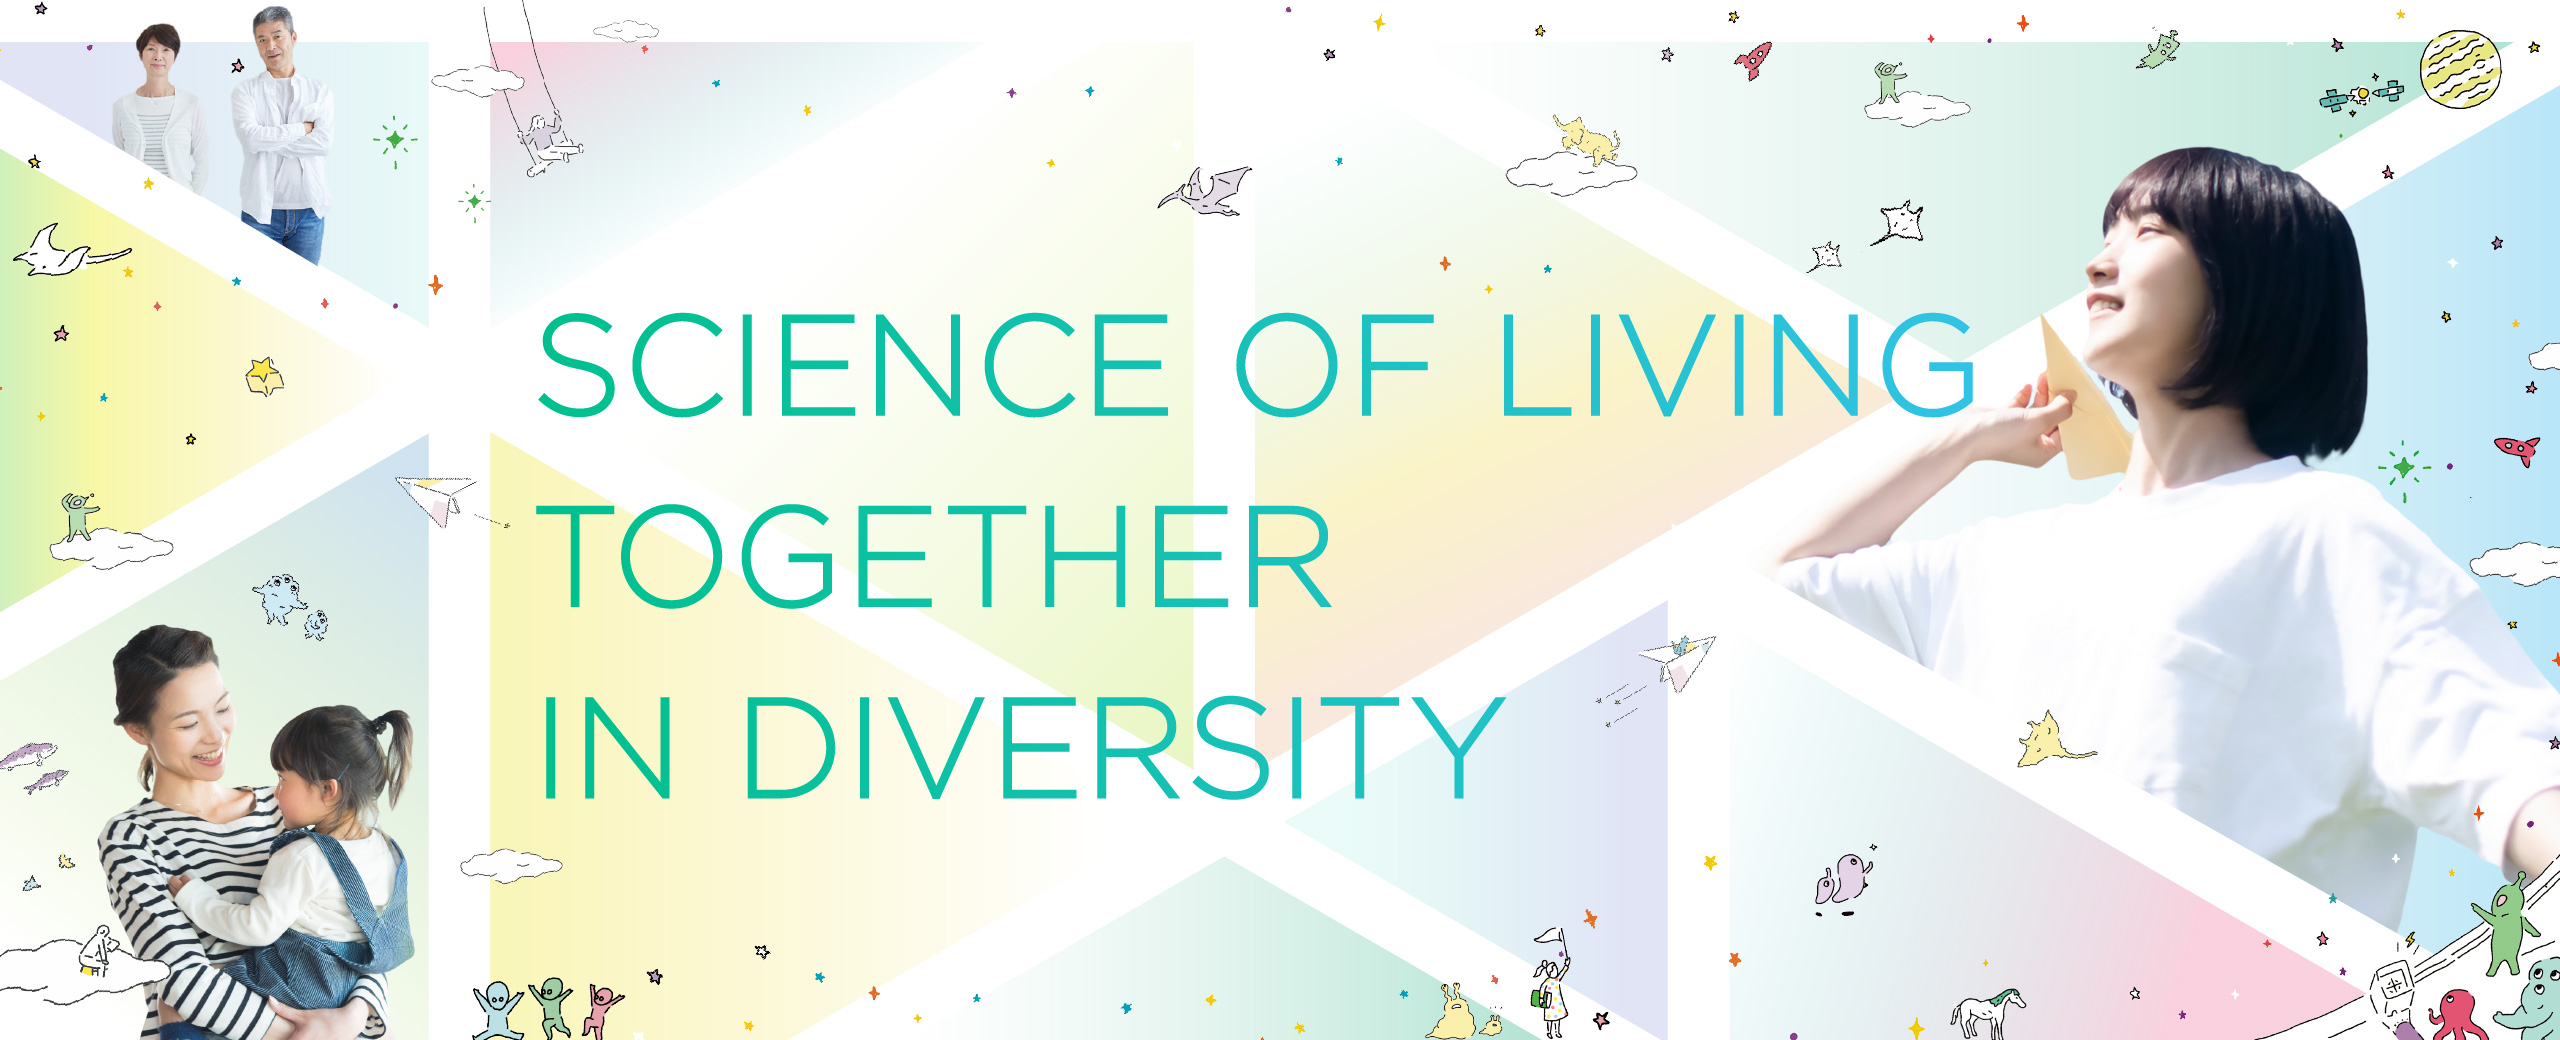 SCIENCE OF LIVING TOGETHER IN DIVERSITY